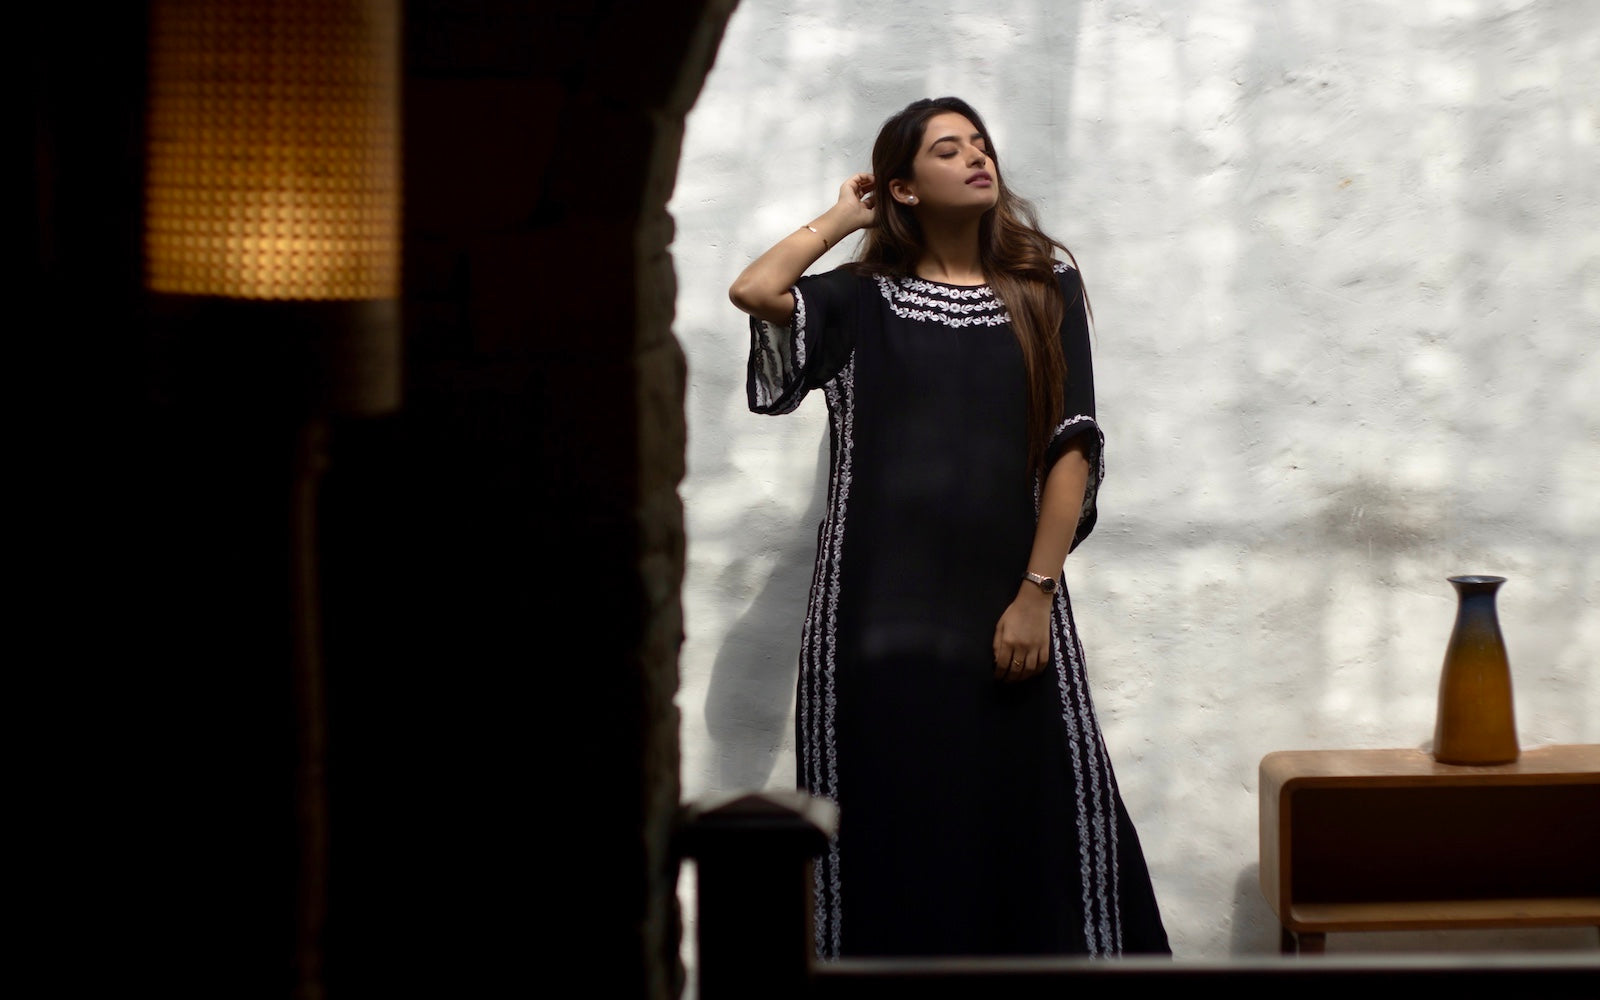 Make an unforgettable entrance in our latest event looks such as this classic black kaftan featuring a thread embroidery along the neckline and the slits till the floor. Carefully cut out to give you the perfect flare and movement for any season event. 